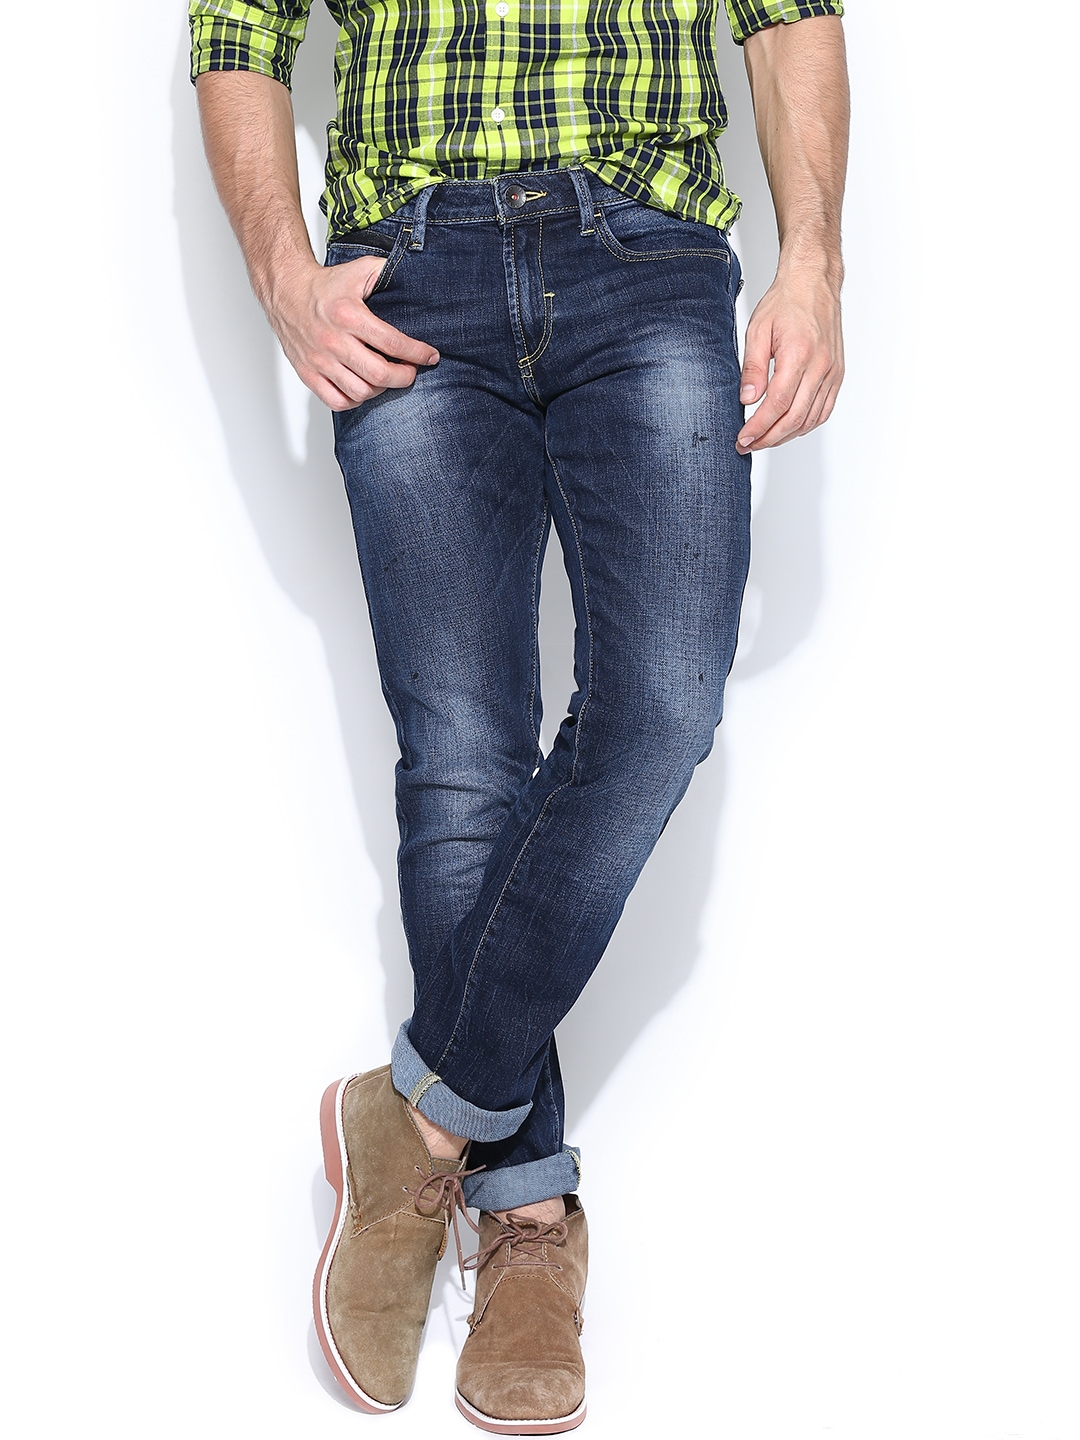 Home Clothing Men Clothing Jeans United Colors of Benetton Jeans